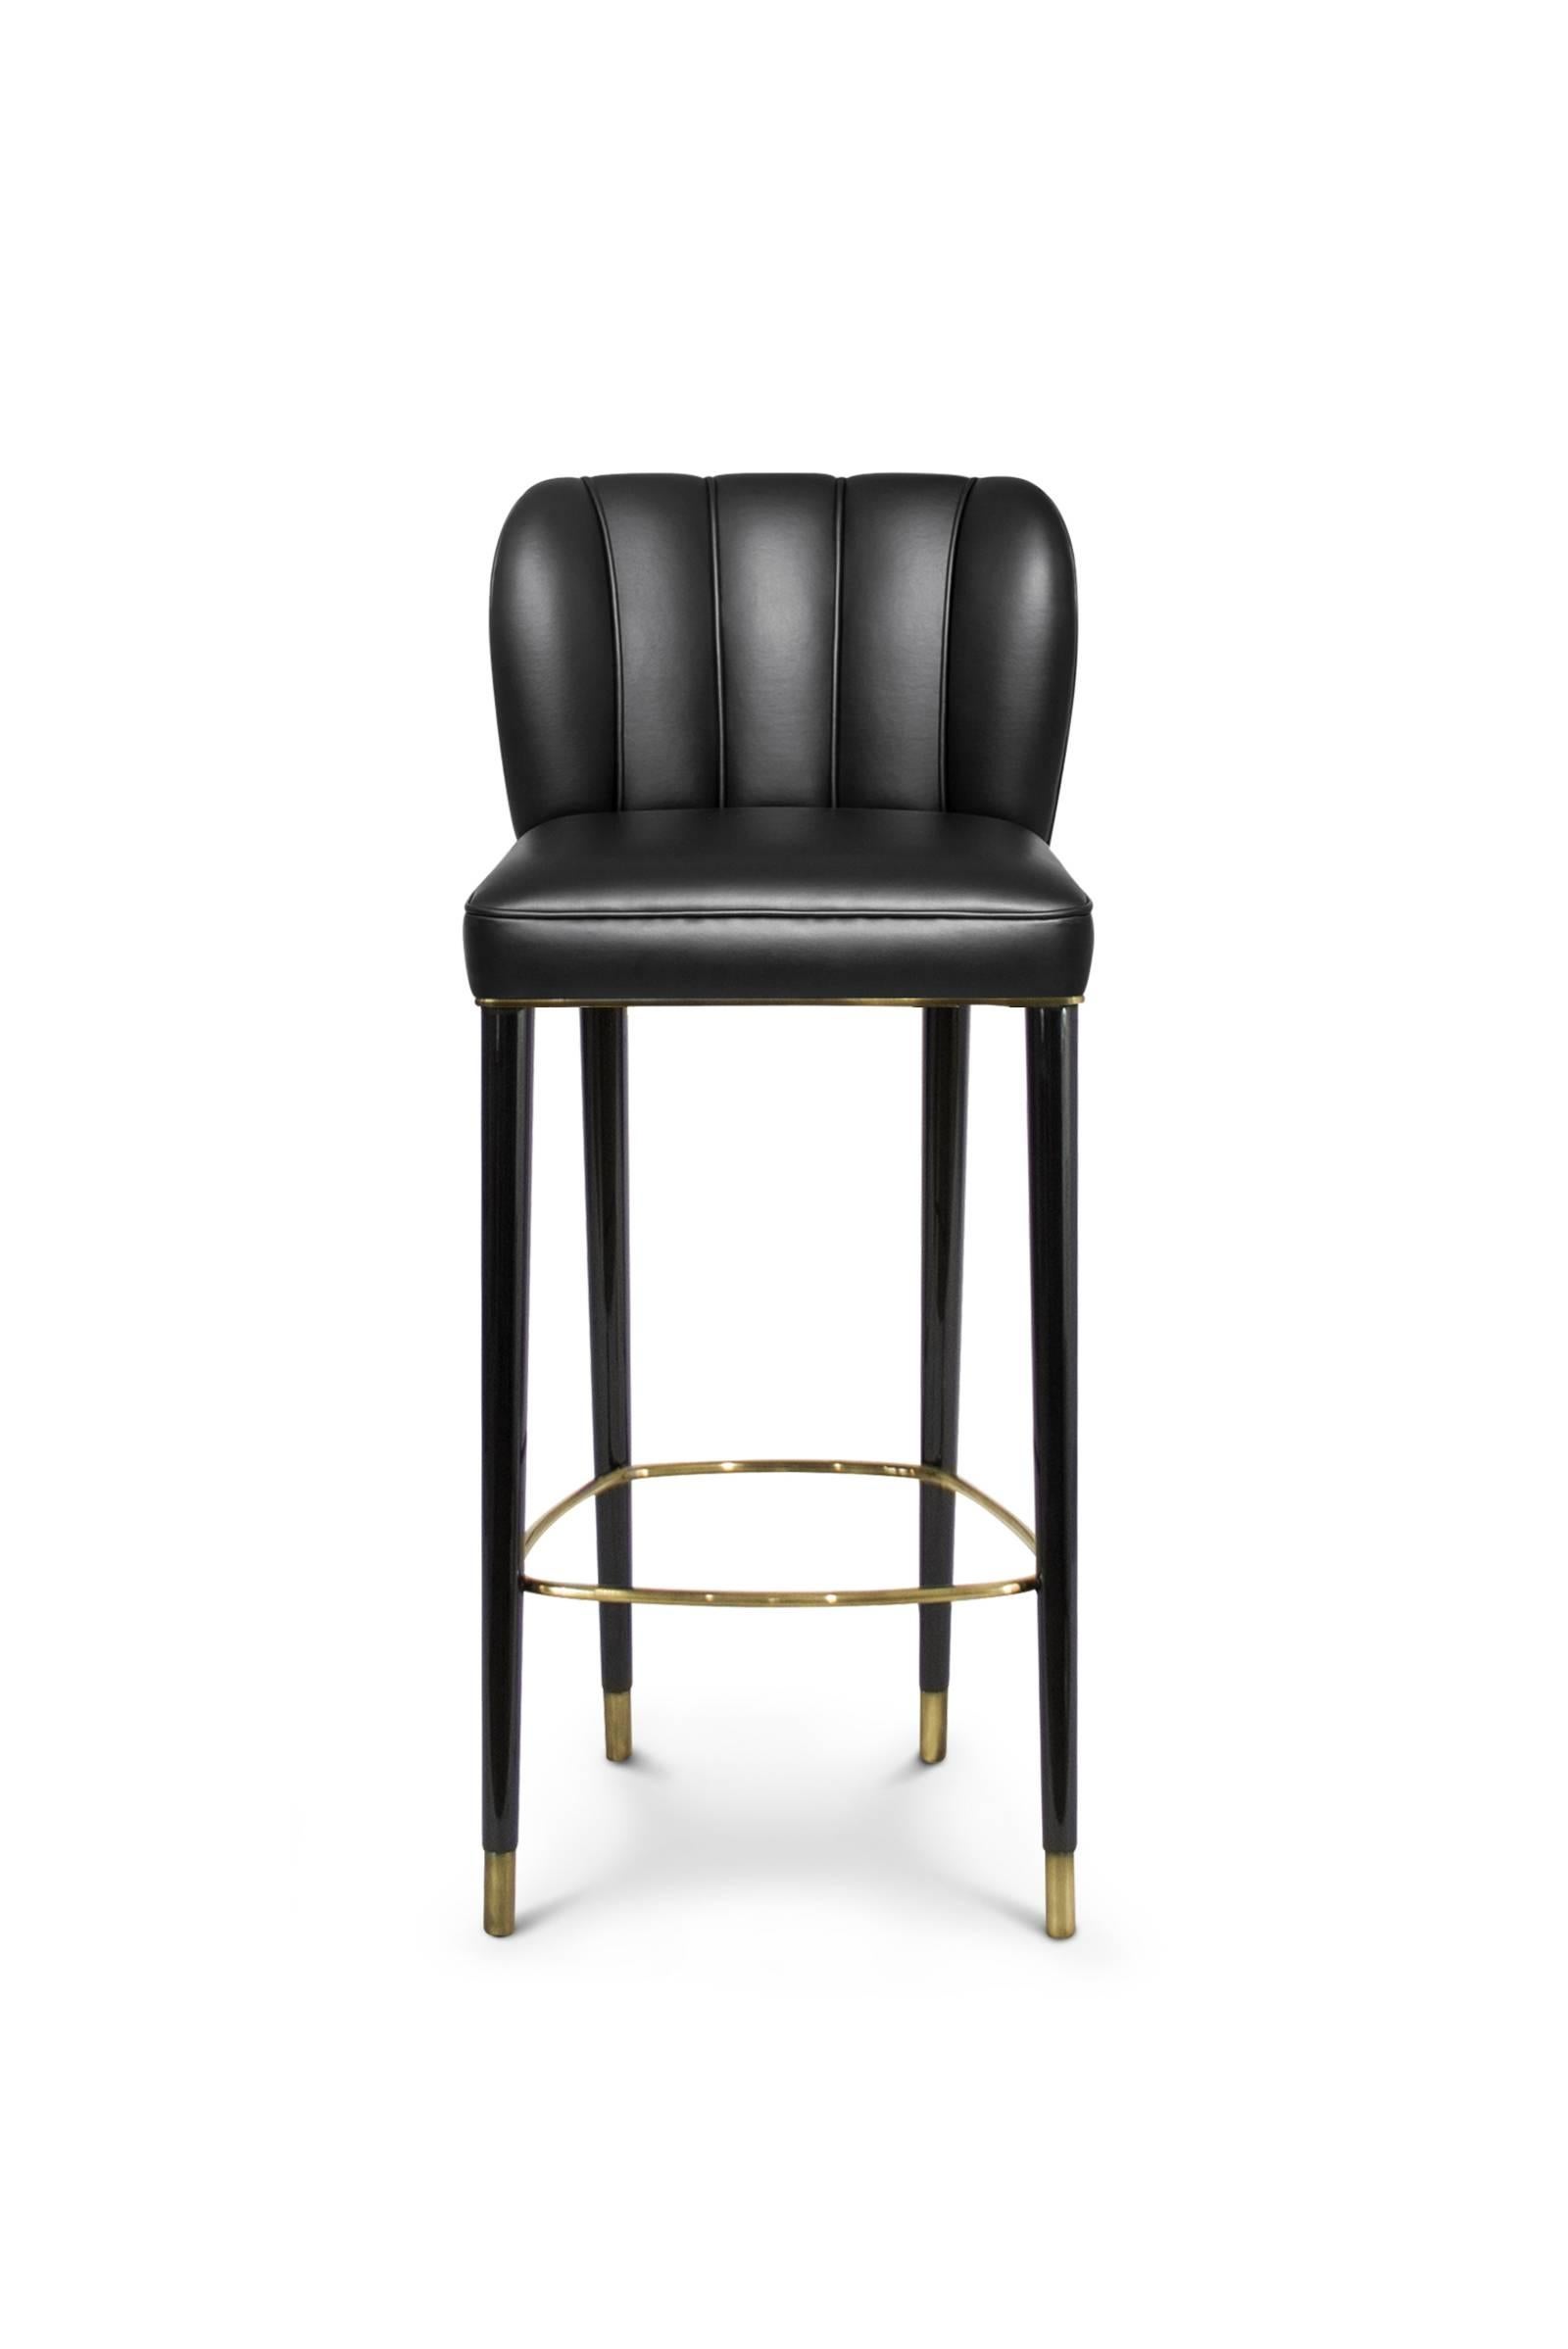 Bar stool dragon upholstered and covered with
leather style with black lacquered feet with glossy 
aged brass details.
